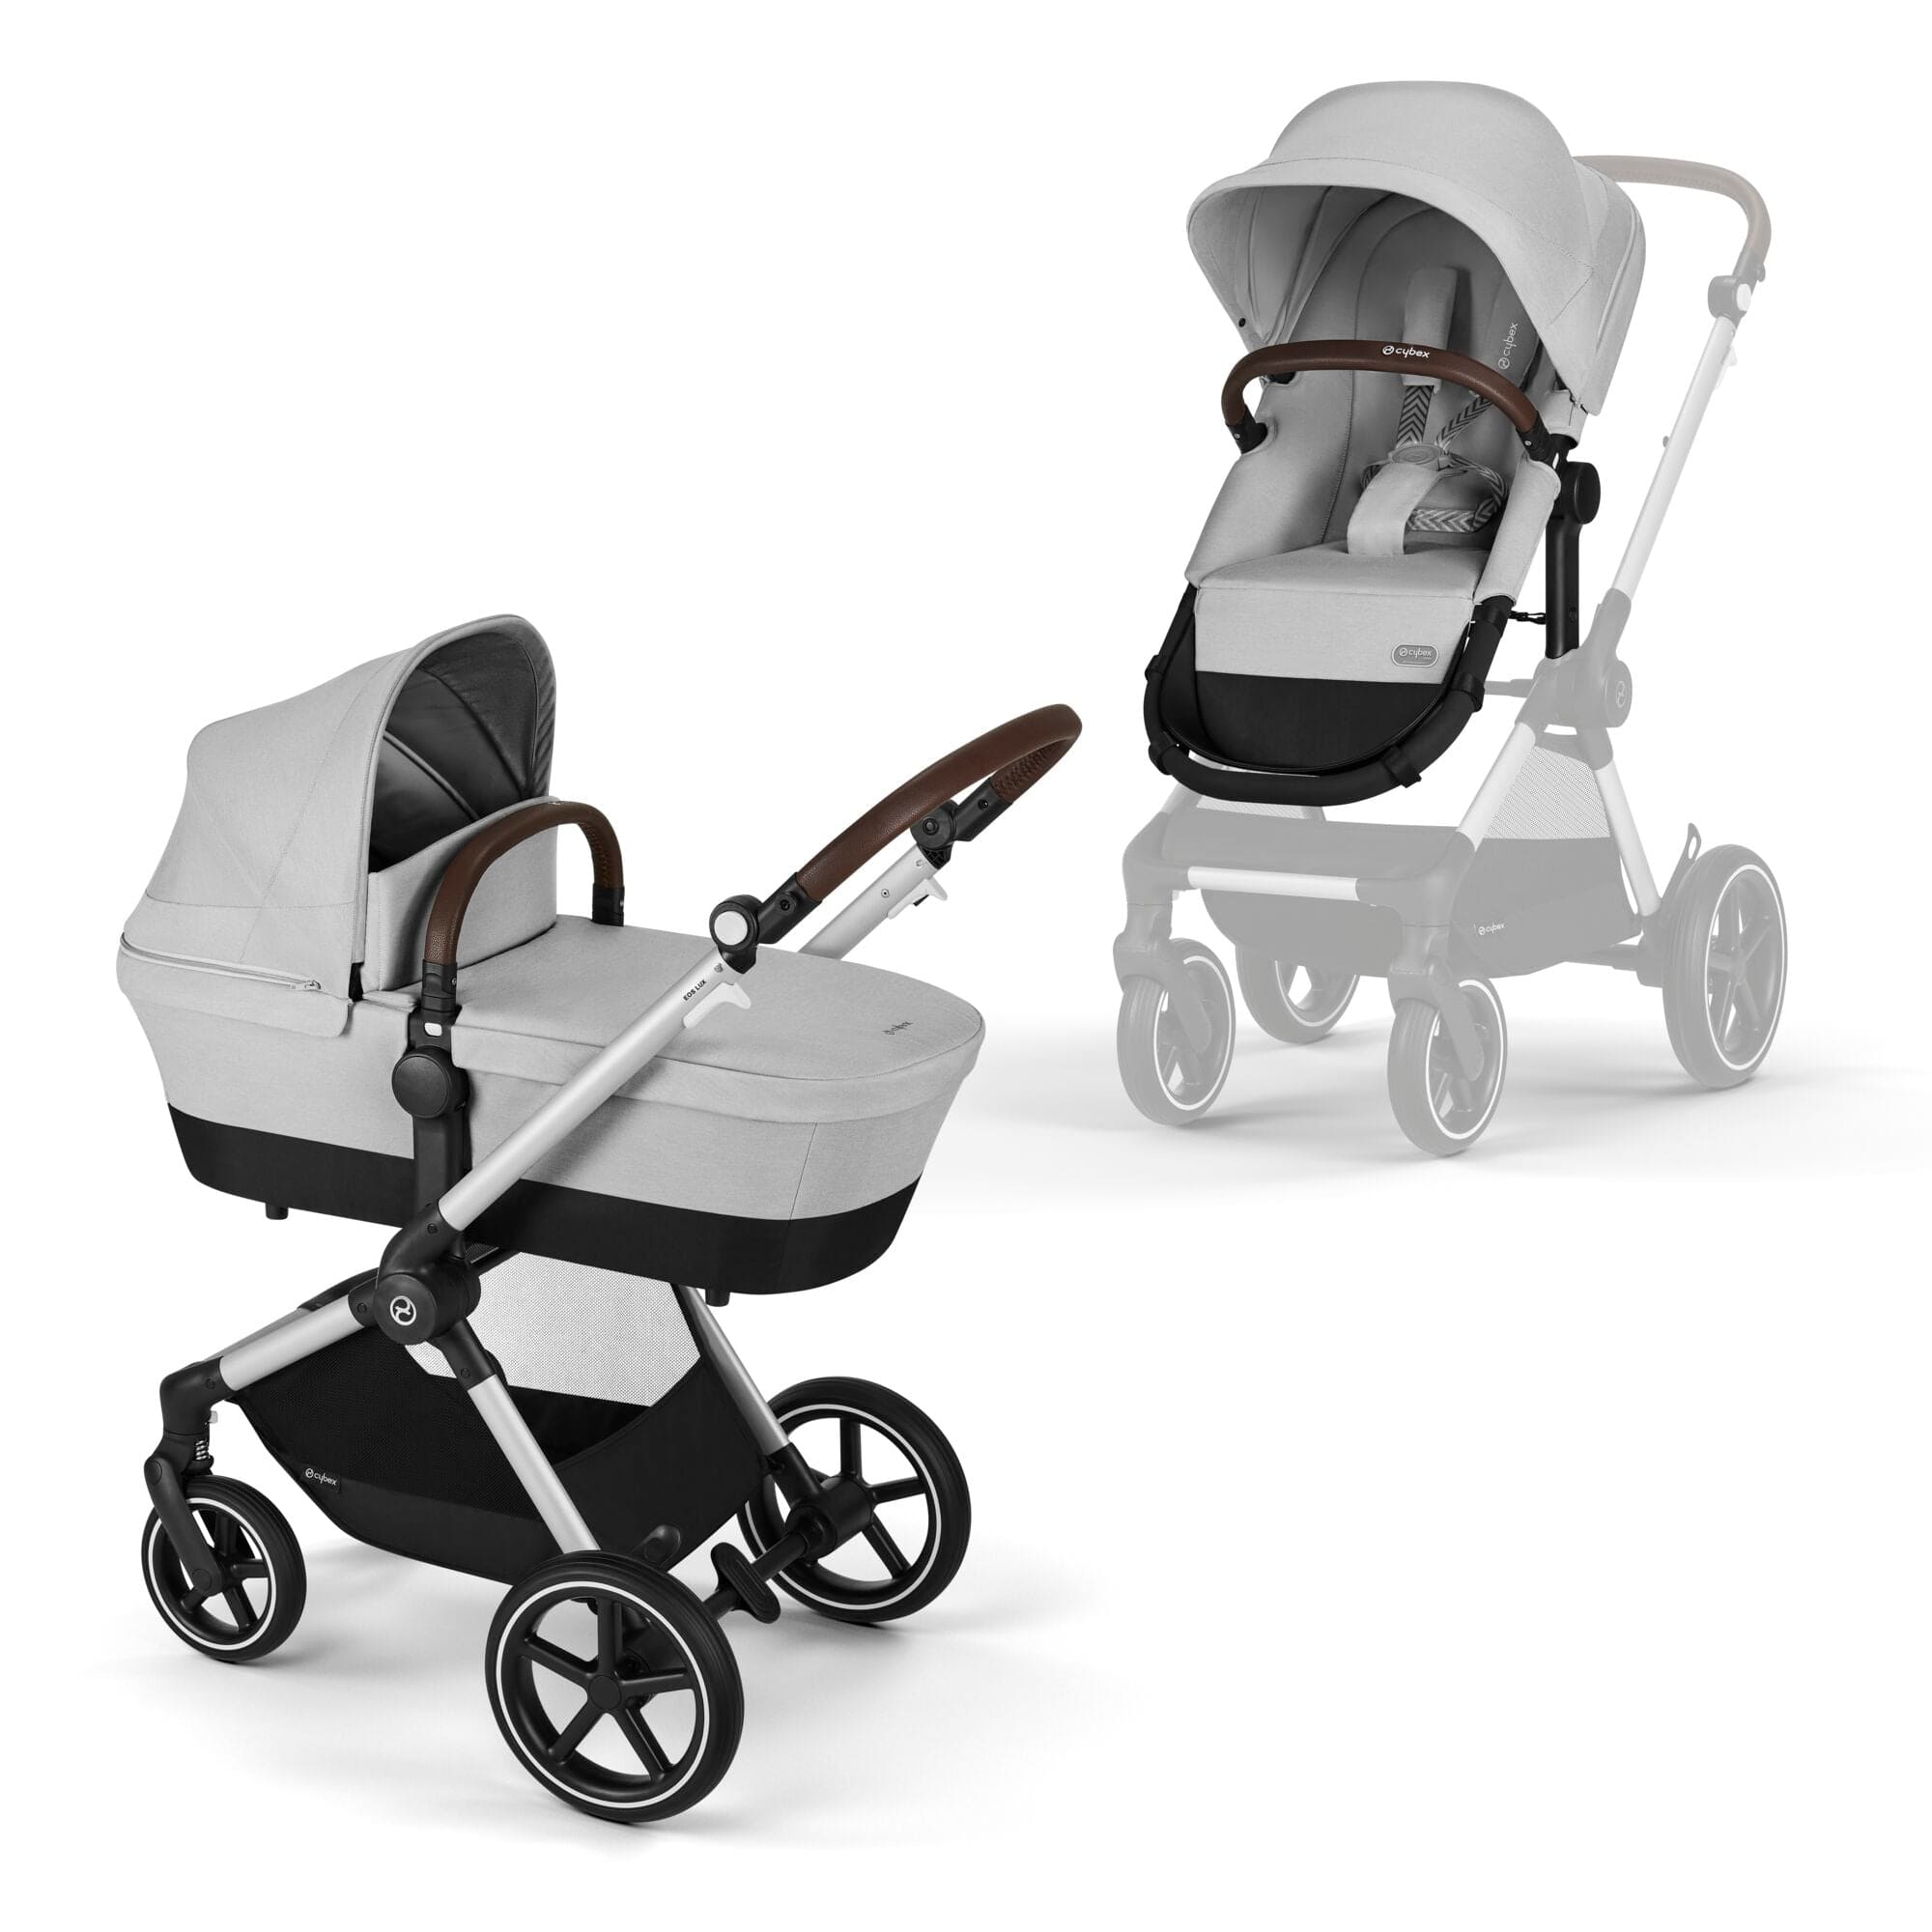 Cybex Eos Lux Comfort 9 Piece Bundle in Lava Grey Travel Systems 14530-SLV-LAV-GRY 4063846368563